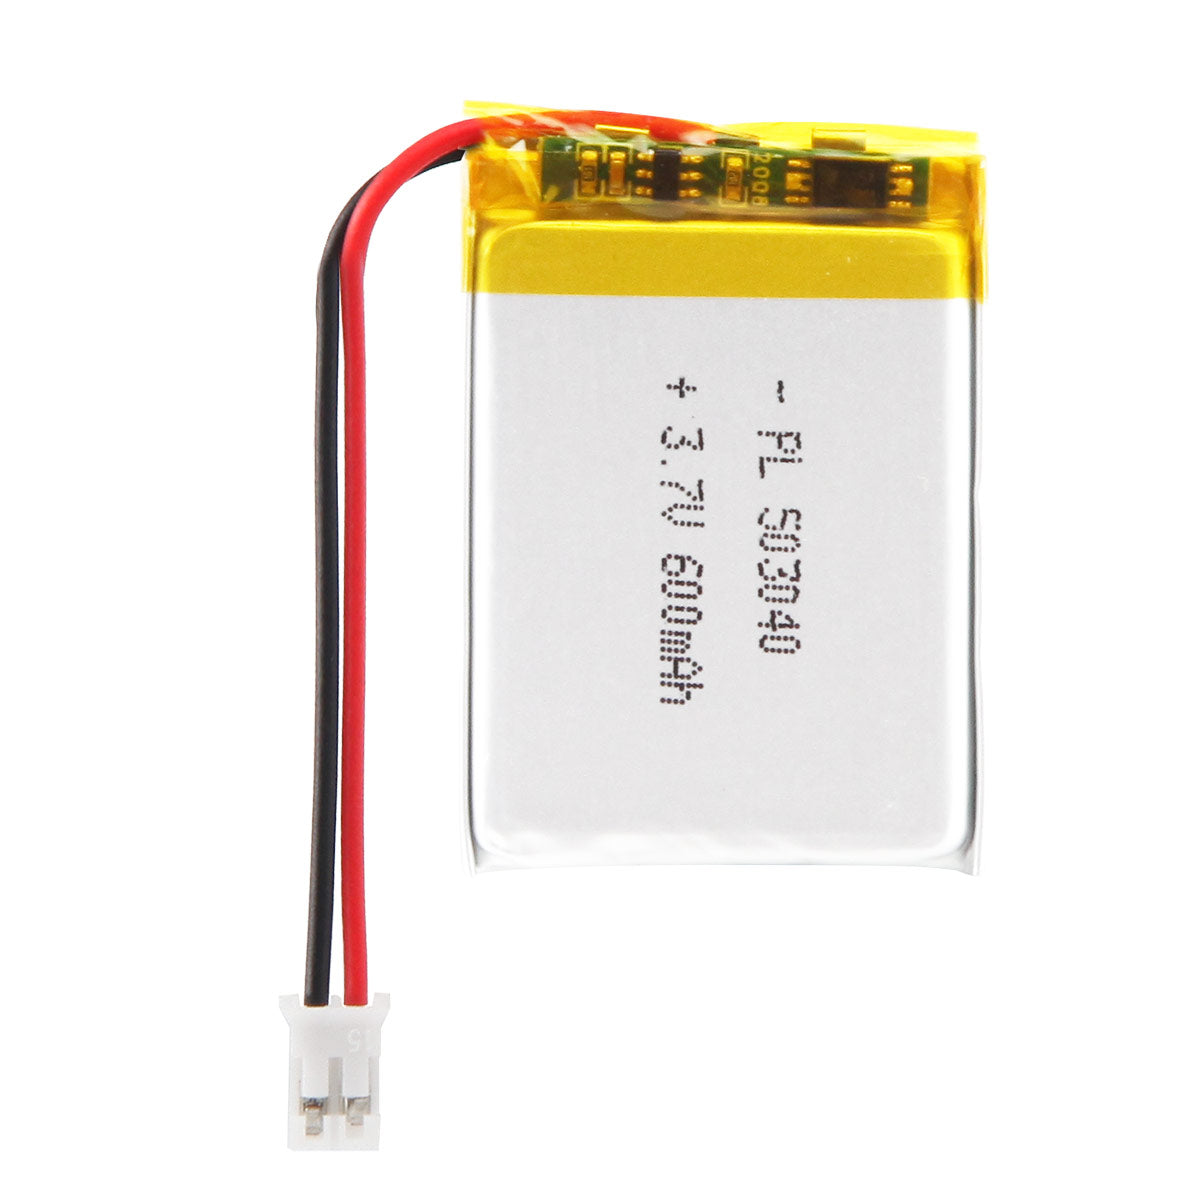 3.7V 600mAh 503040 Rechargeable Lithium Polymer Battery Length 42mm